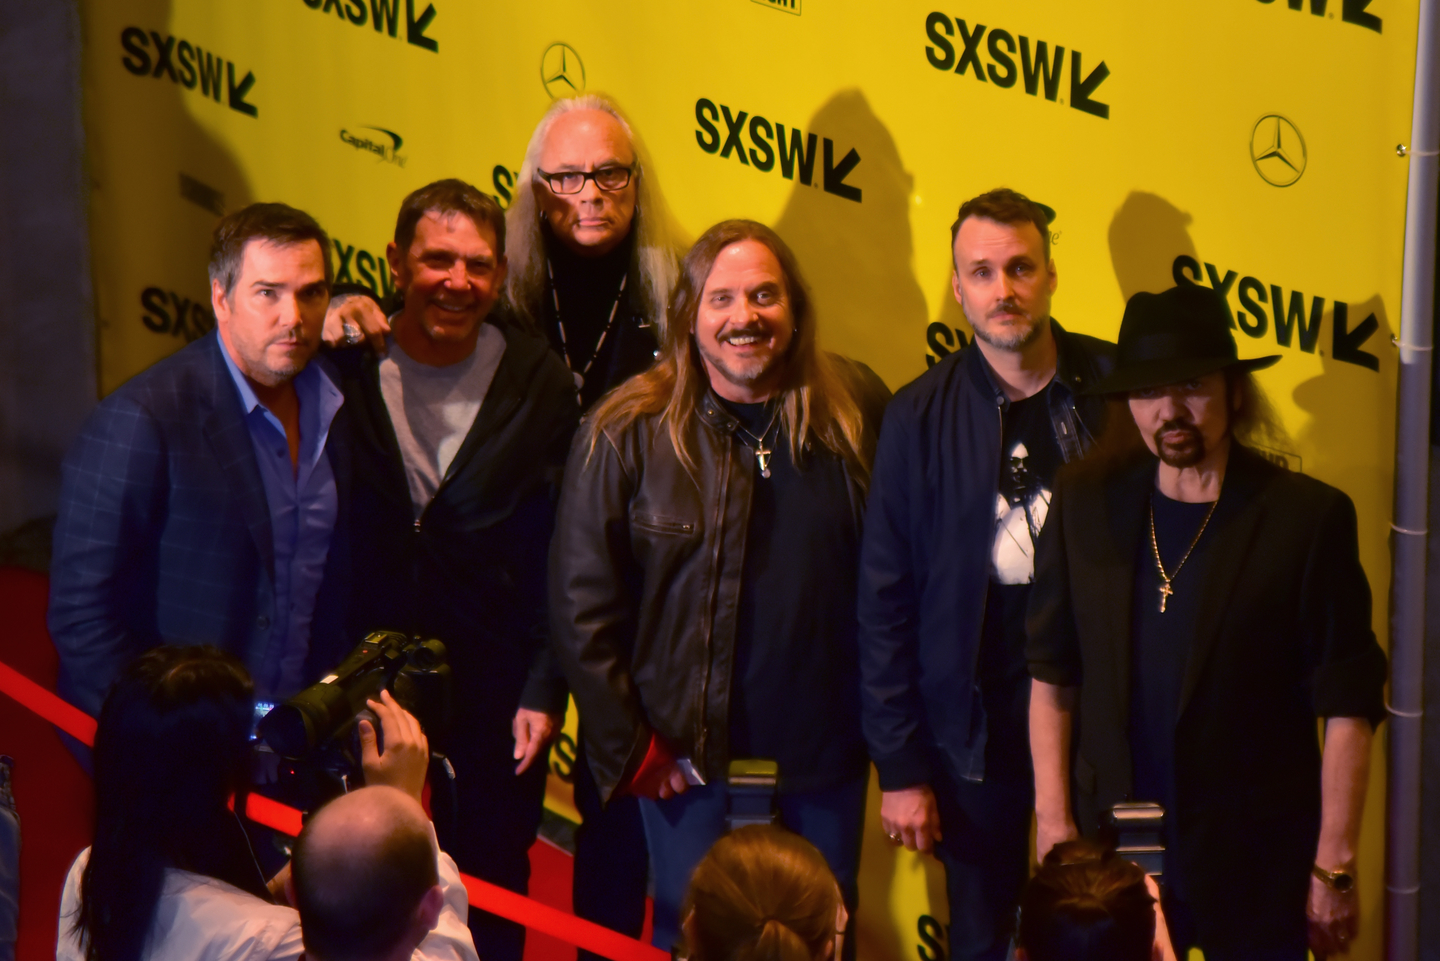 Lynyrd Skynyrd and director Stephen Kijak at the If I Leave Here Tomorrow: A Film About Lynyrd Skynyrd World Premiere. Photo by Jason Bollenbacher/Getty Images for SXSW